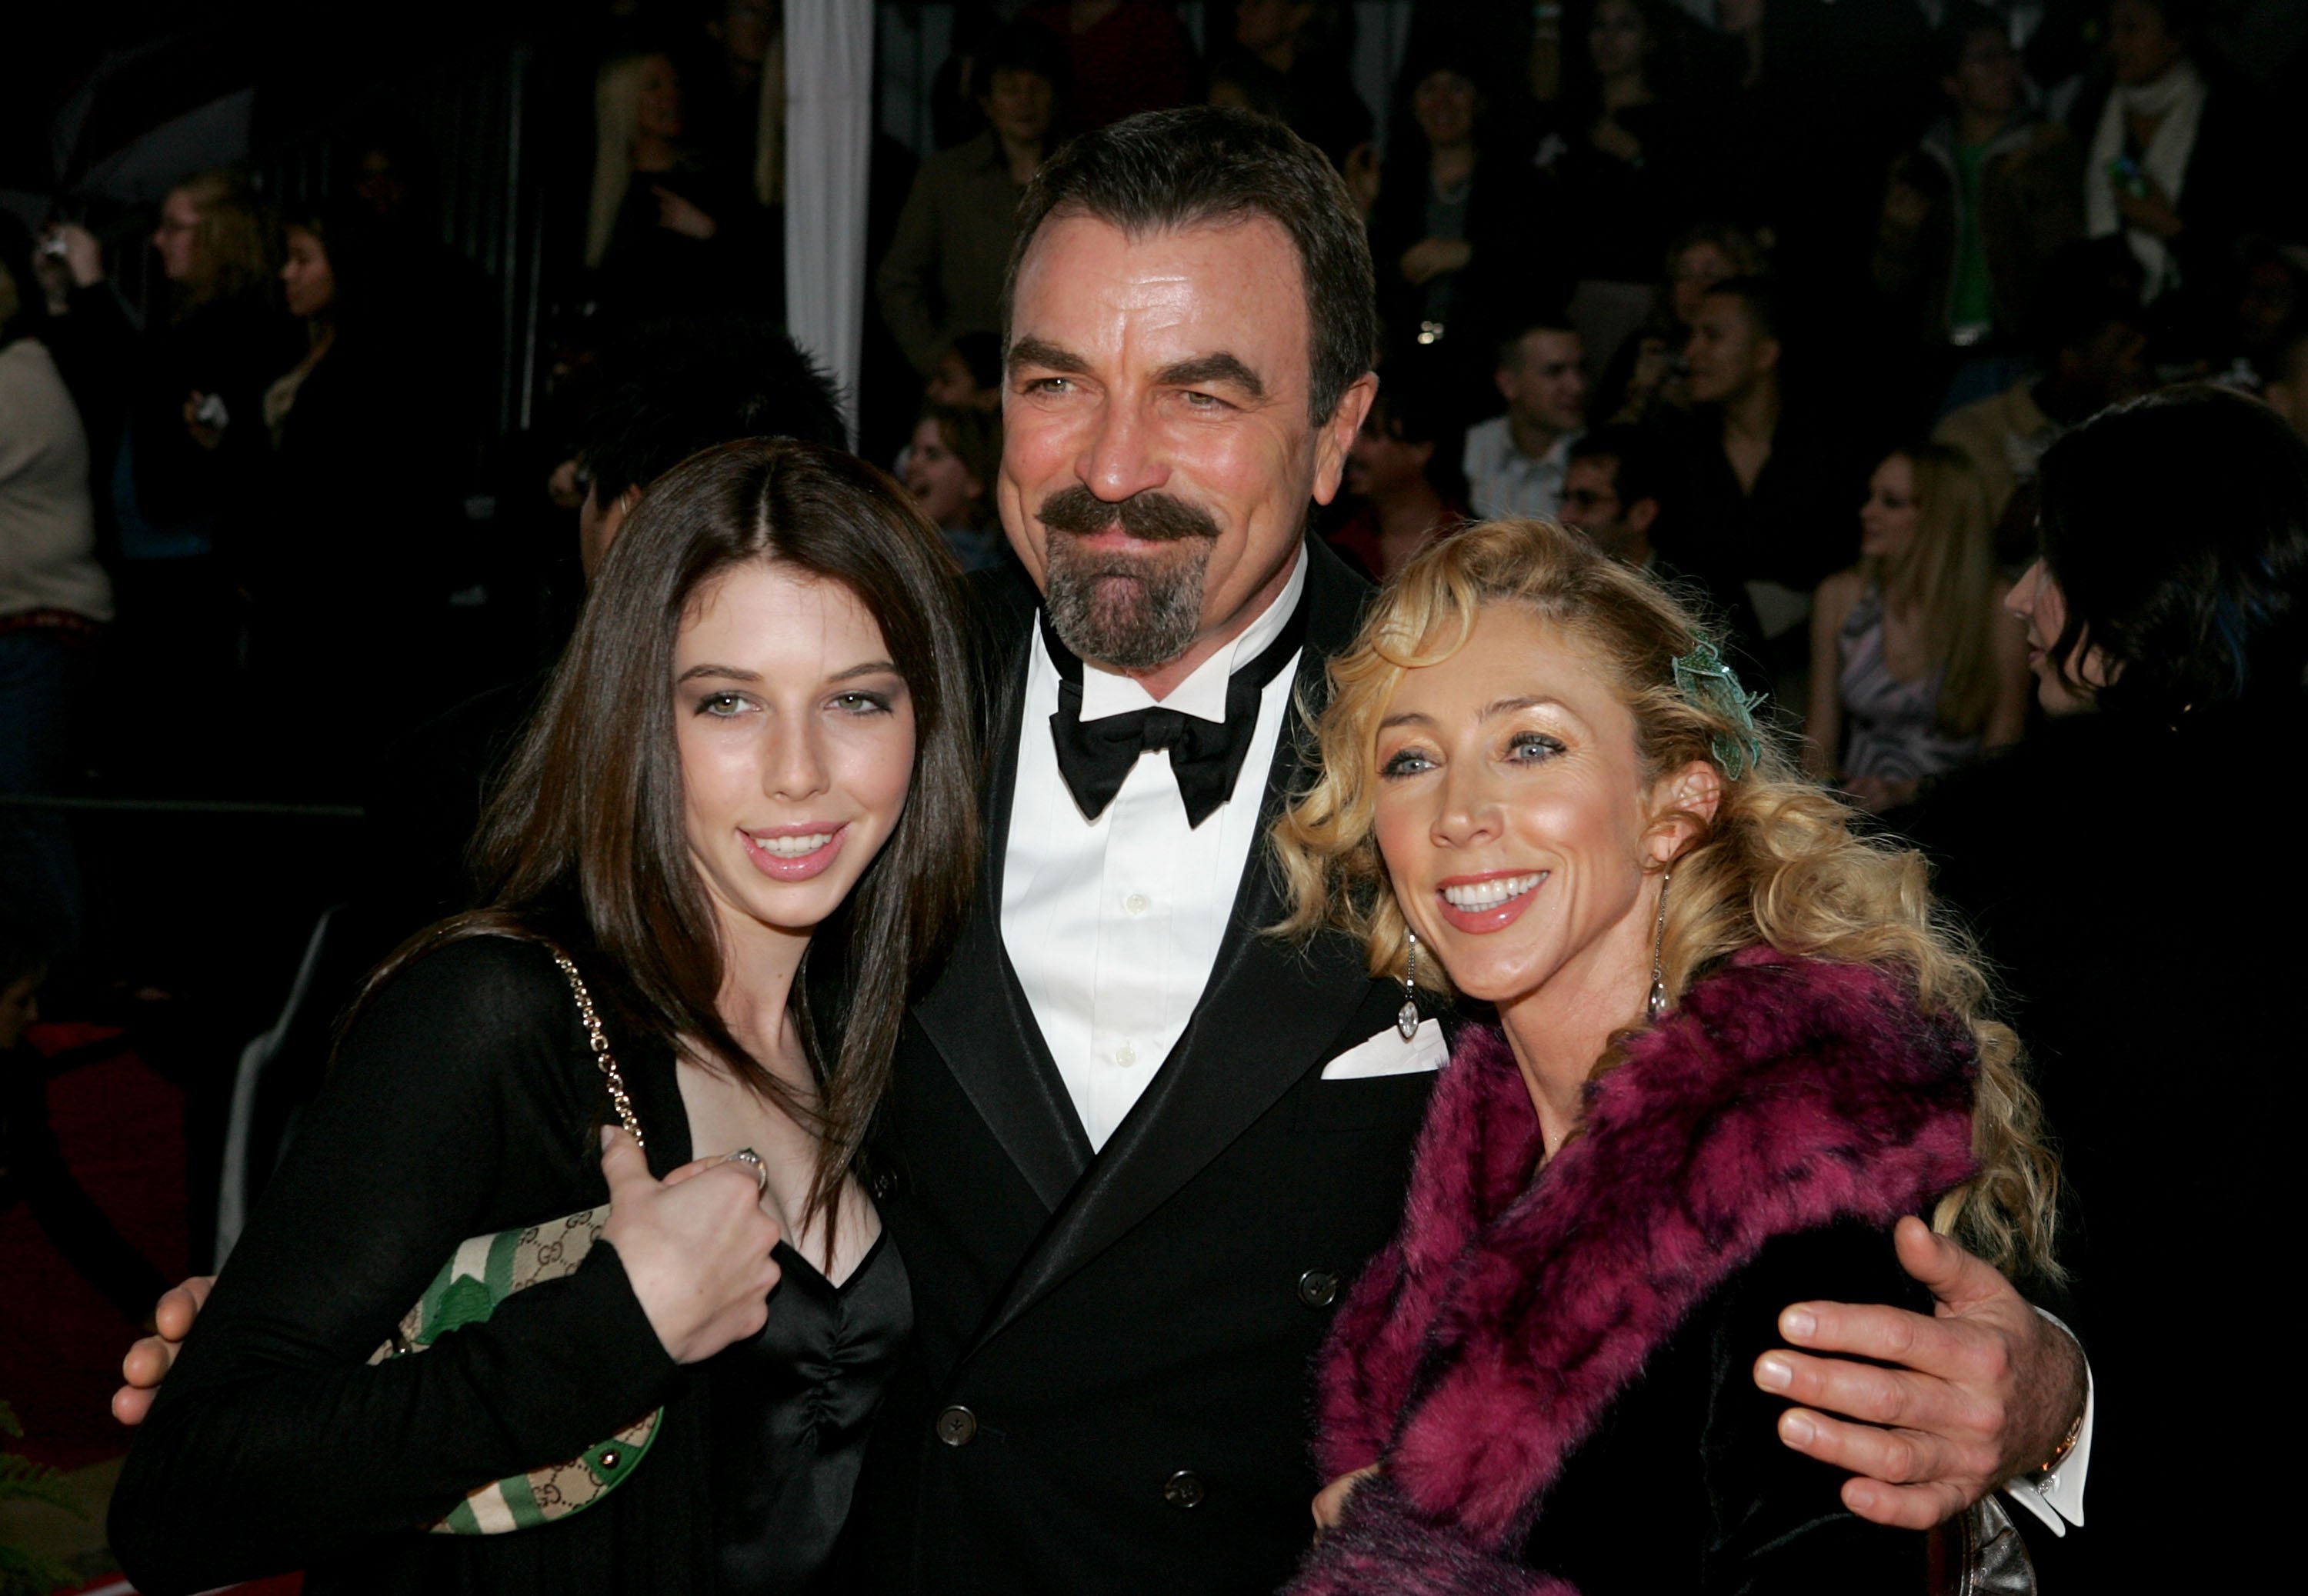 Tom Selleck daughter Hannah (L) and wife Jillie Mack (R) at the 31st Annual People's Choice Awards in Pasadena, California on January 9, 2005 | Photo: Getty Images